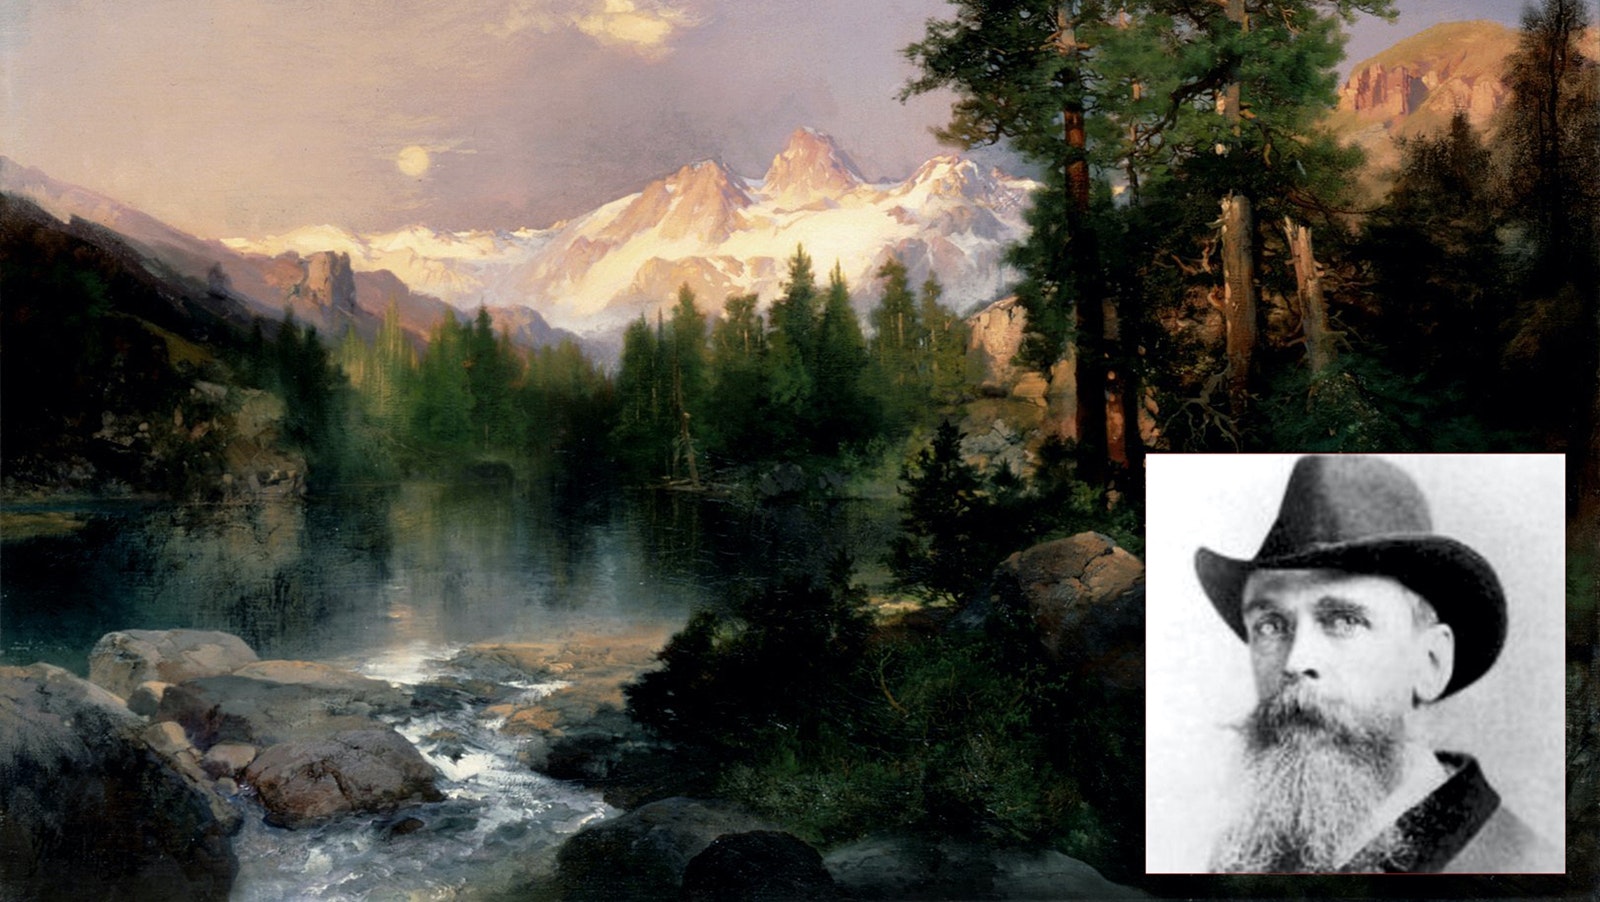 Thomas Moran, lower right, and a depiction of The Three Tetons.